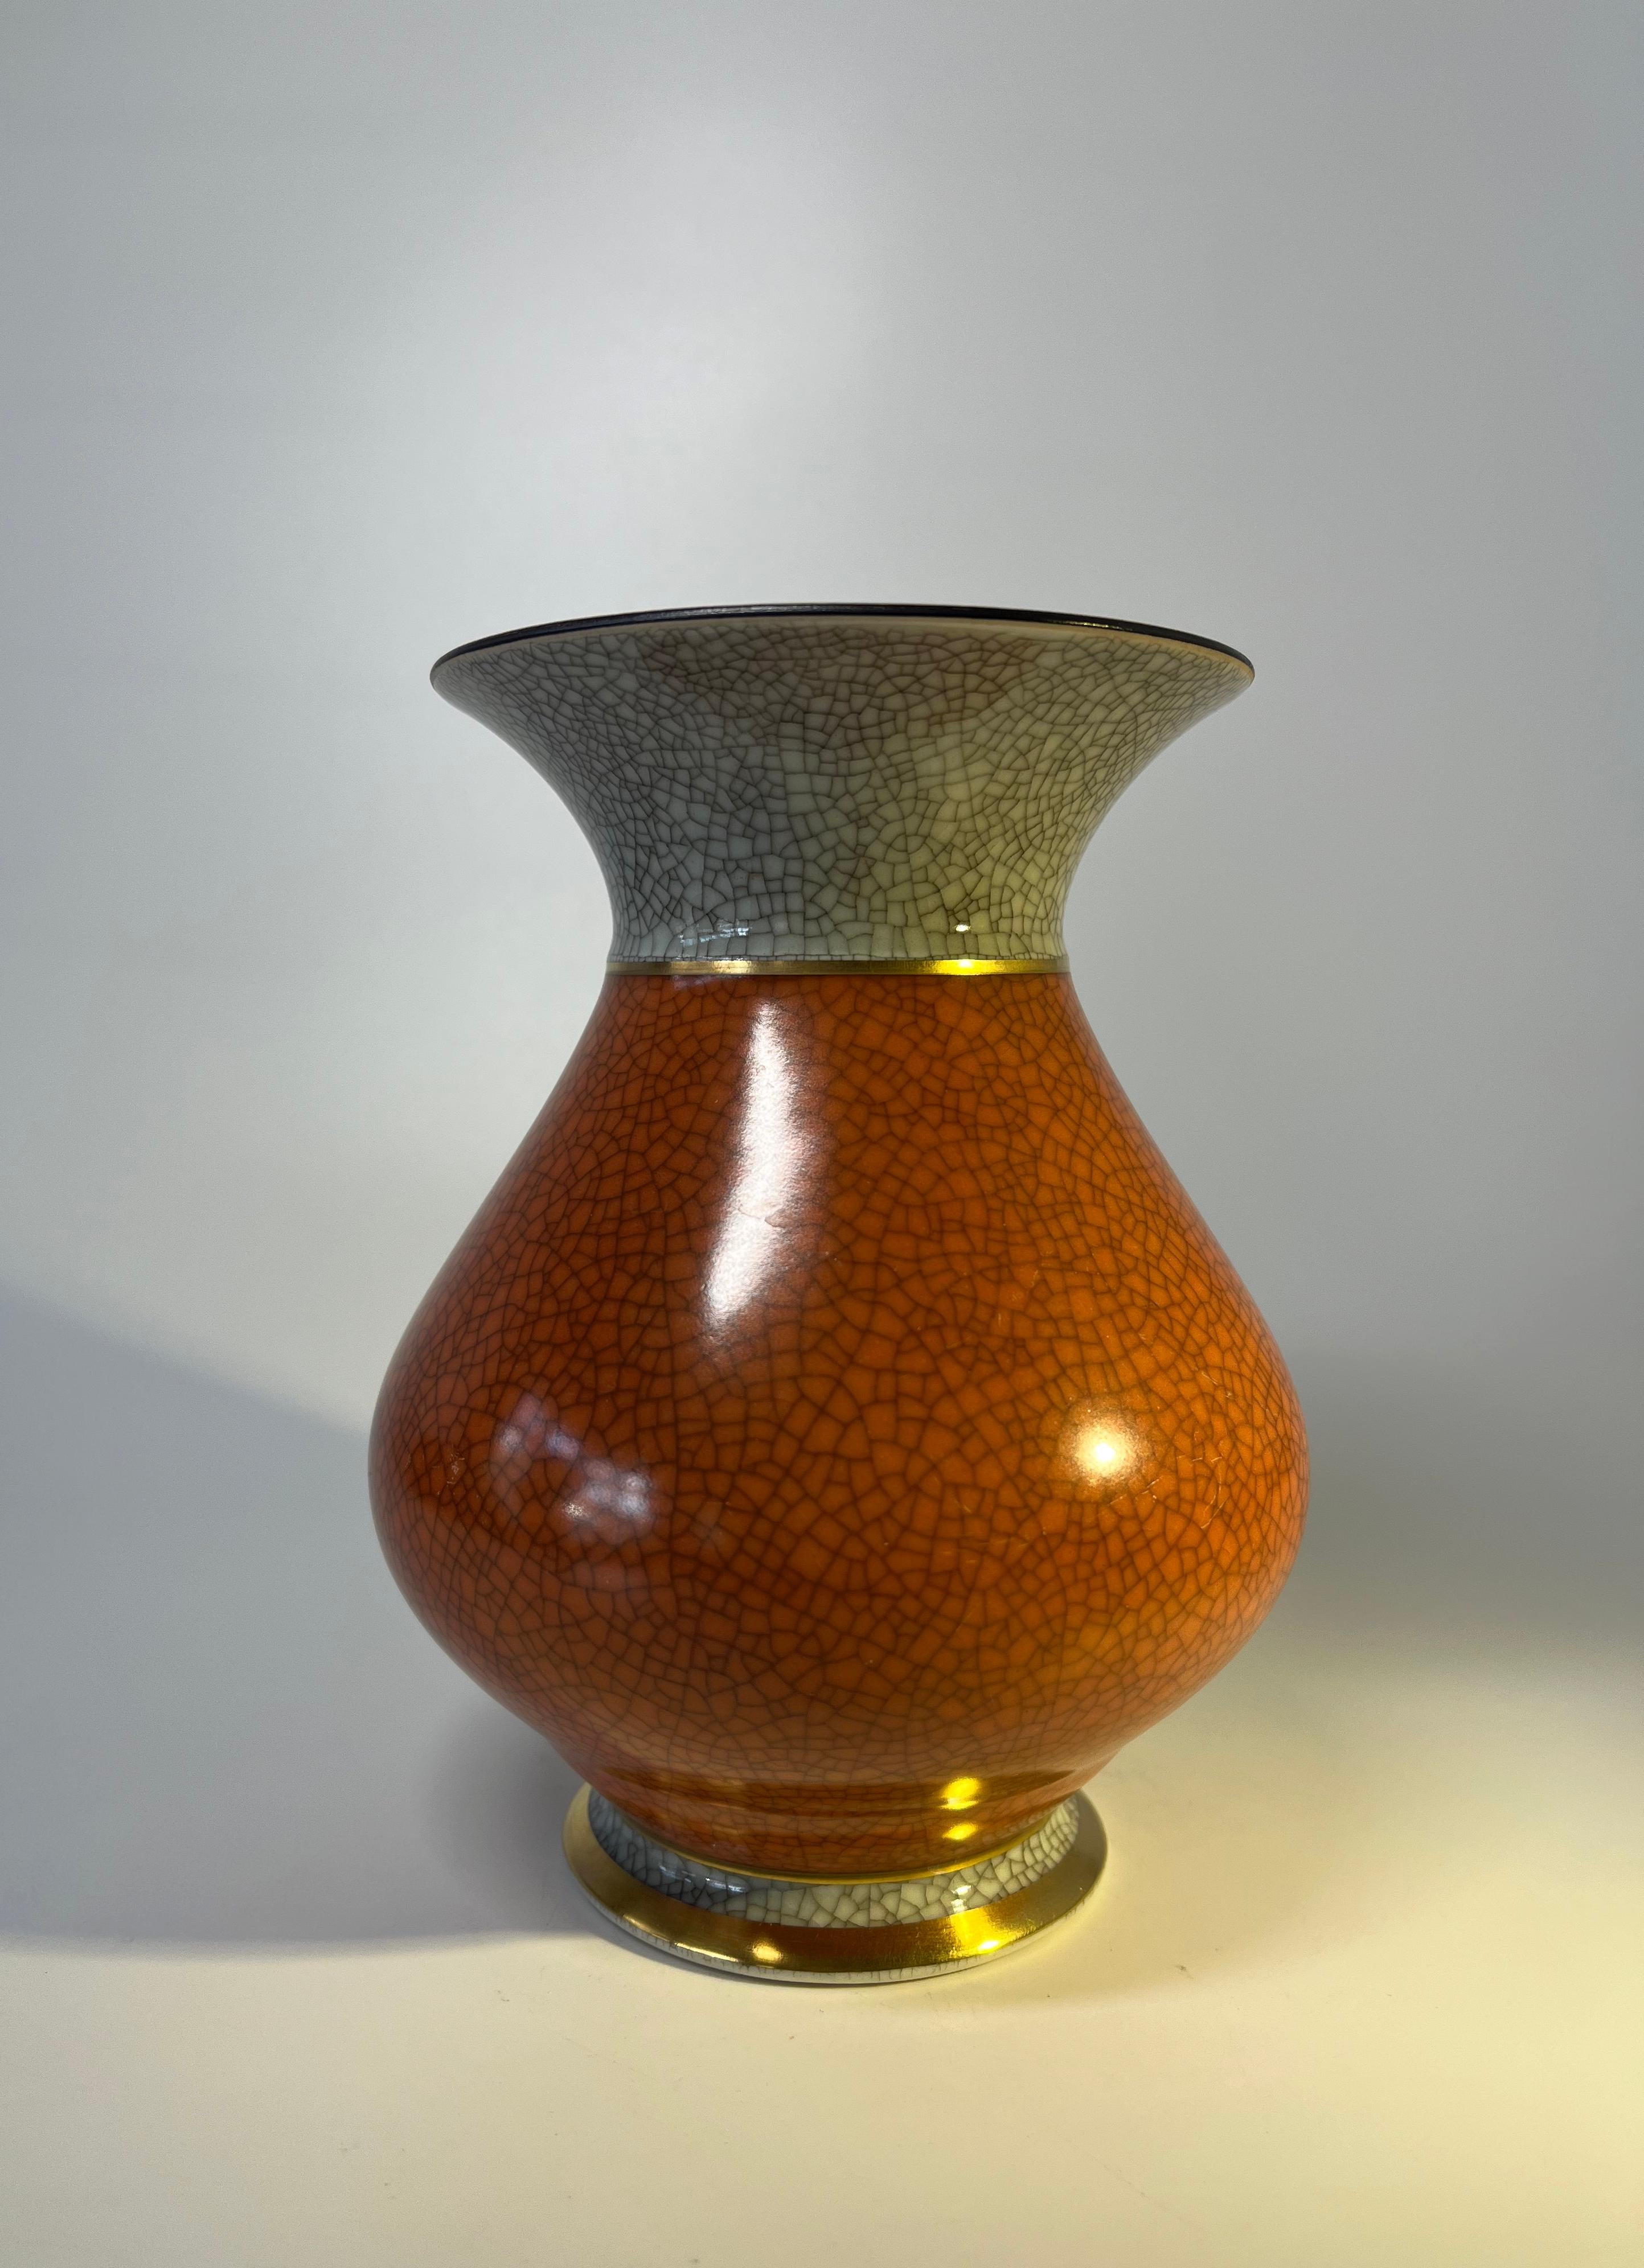 Royal Copenhagen porcelain gilded terracotta and grey crackle glazed baluster vase. 
A premium quality vase with a matt glaze to the terracotta porcelain.
Circa 1954.
Stamped and numbered 3060.
Measures: height 6.25 inch, diameter 5